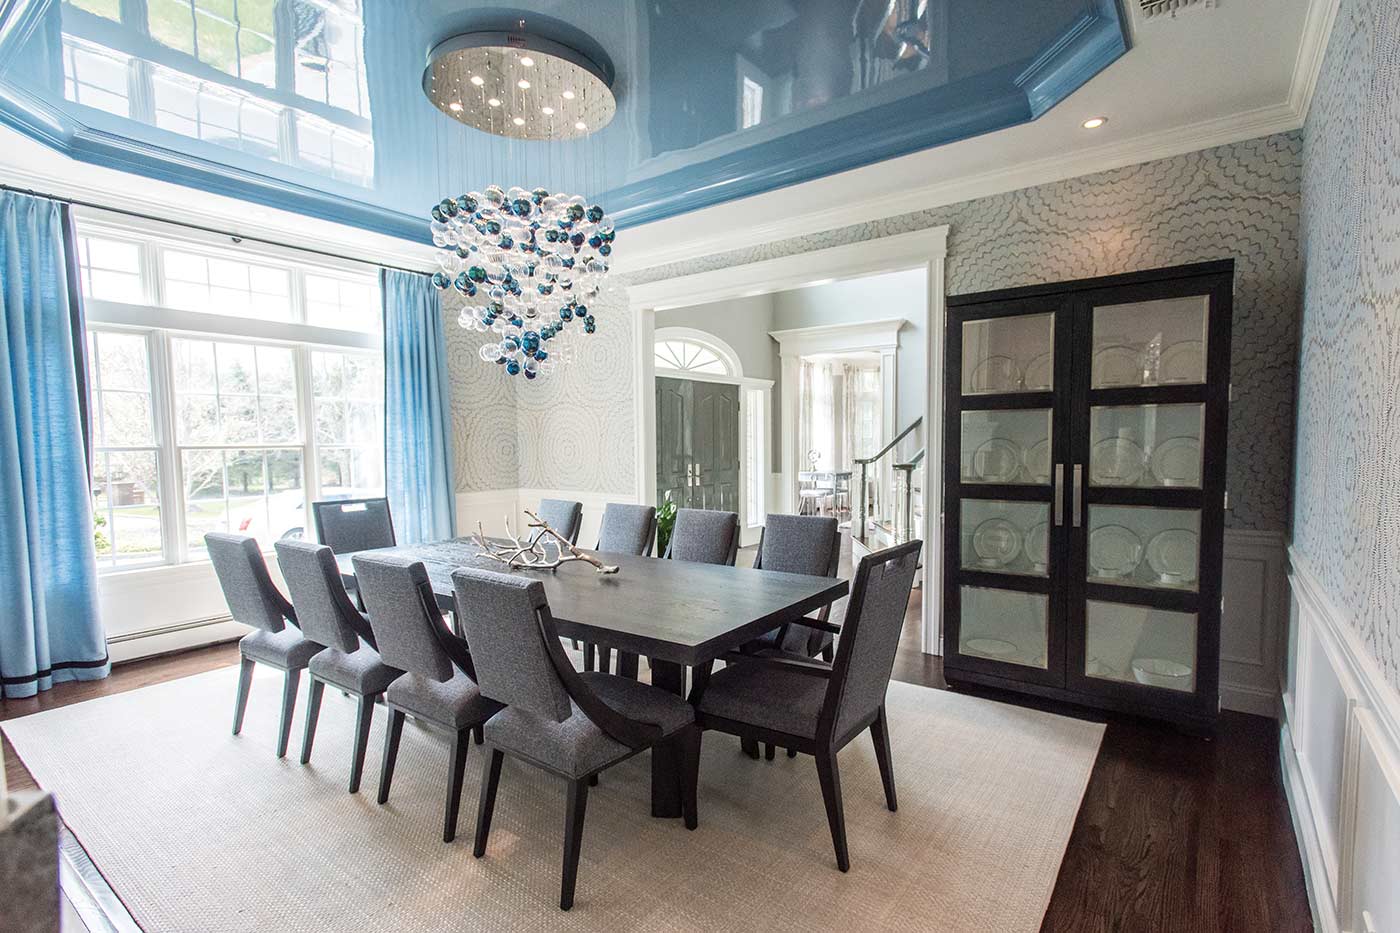 Dining room with blue ceiling